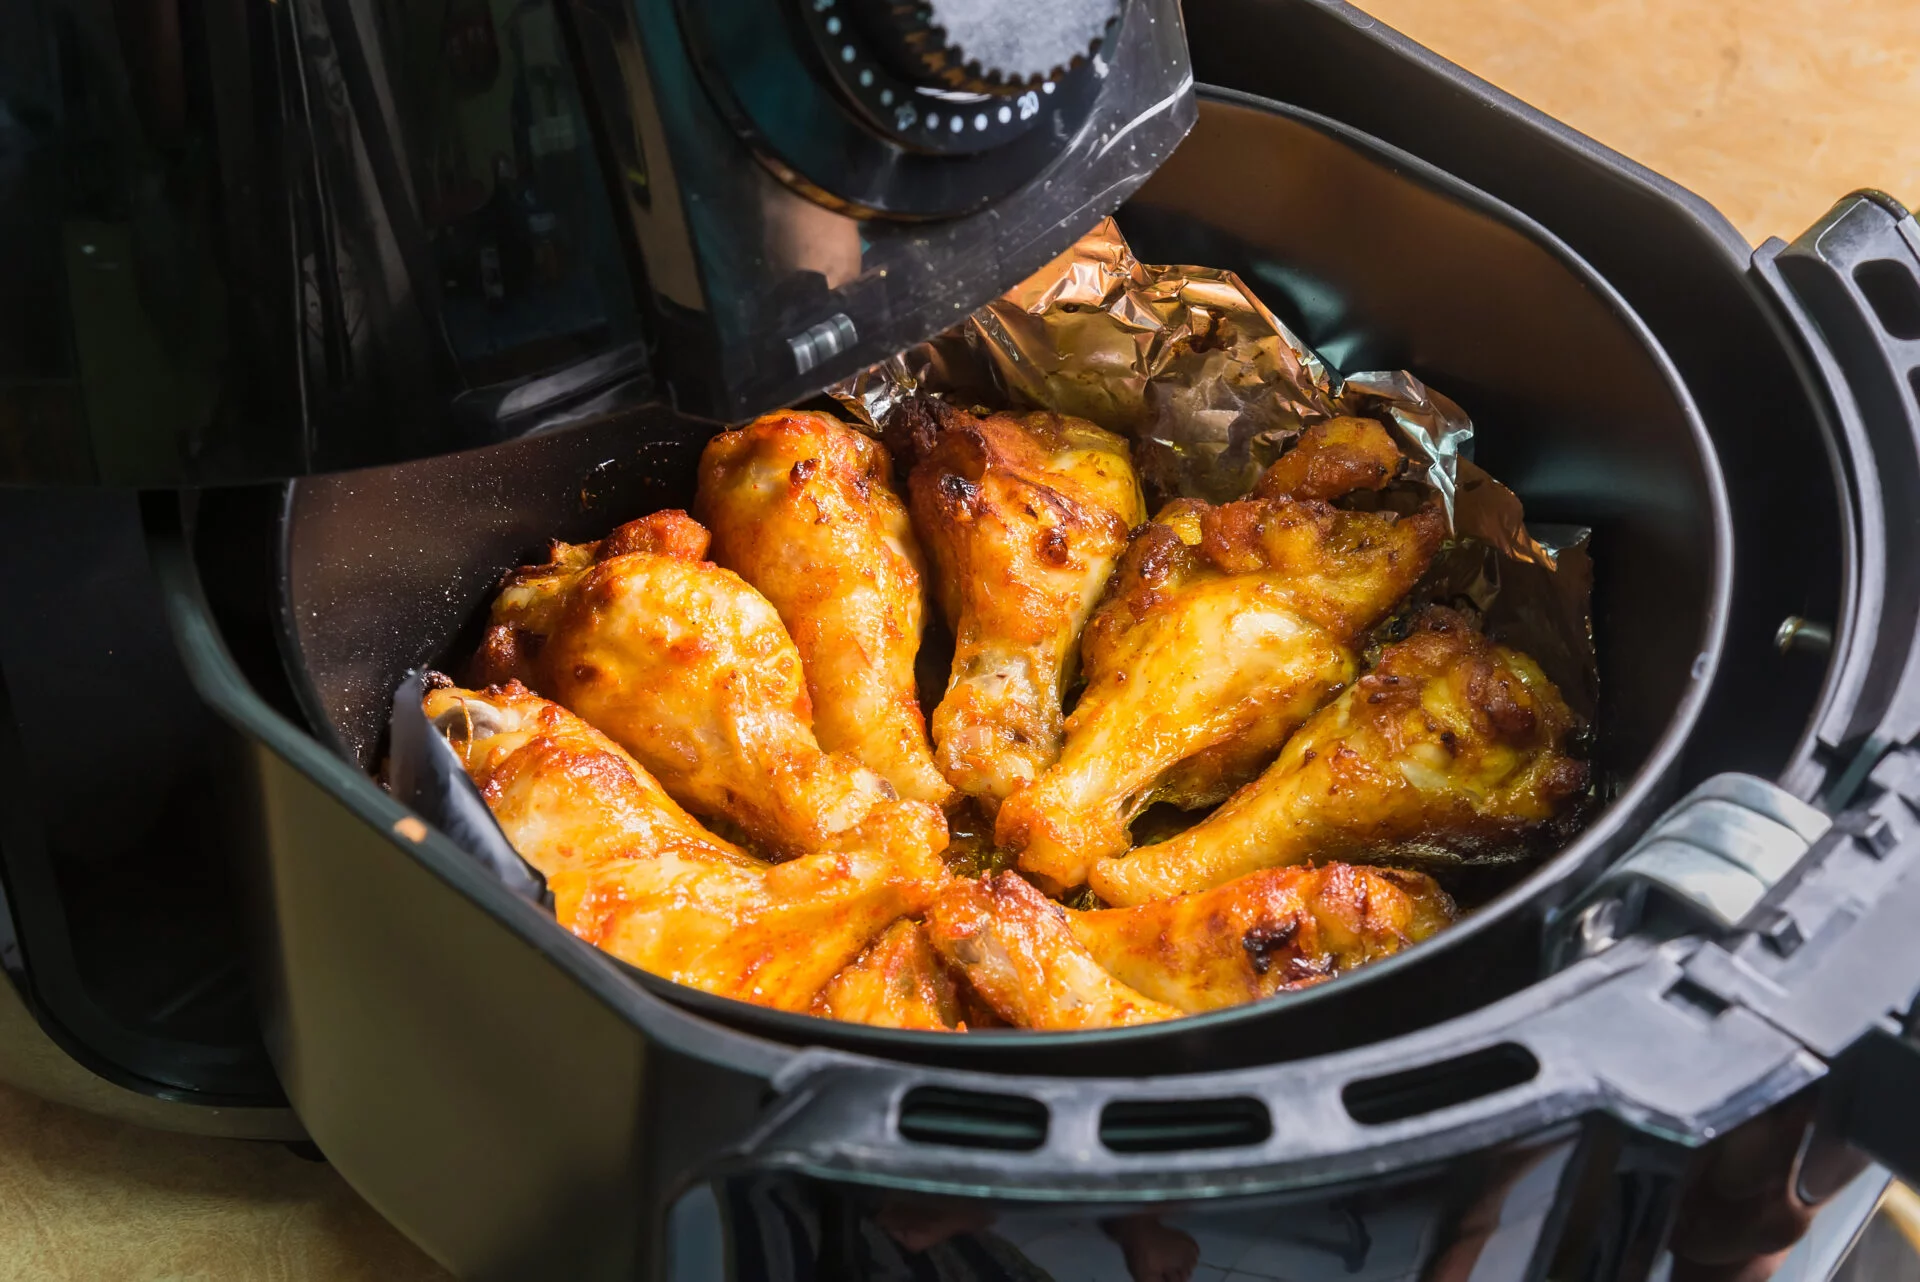 Grill BBQ Chicken Legs in oven air fryer.healthy cooking without oil